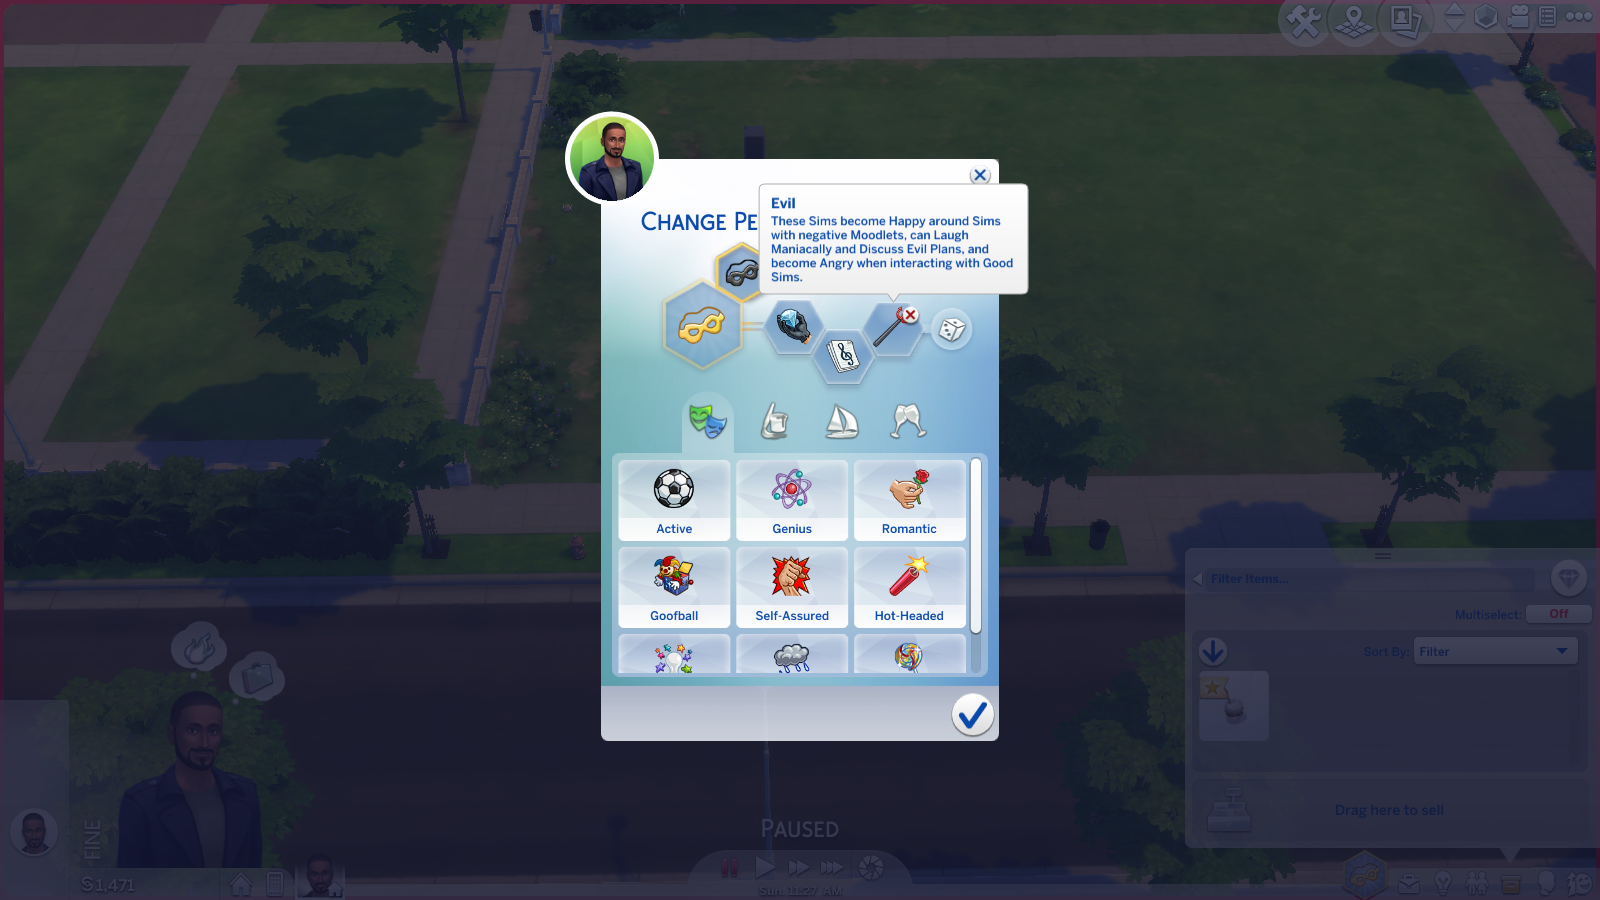 How to Enable Cheats in Sims 4